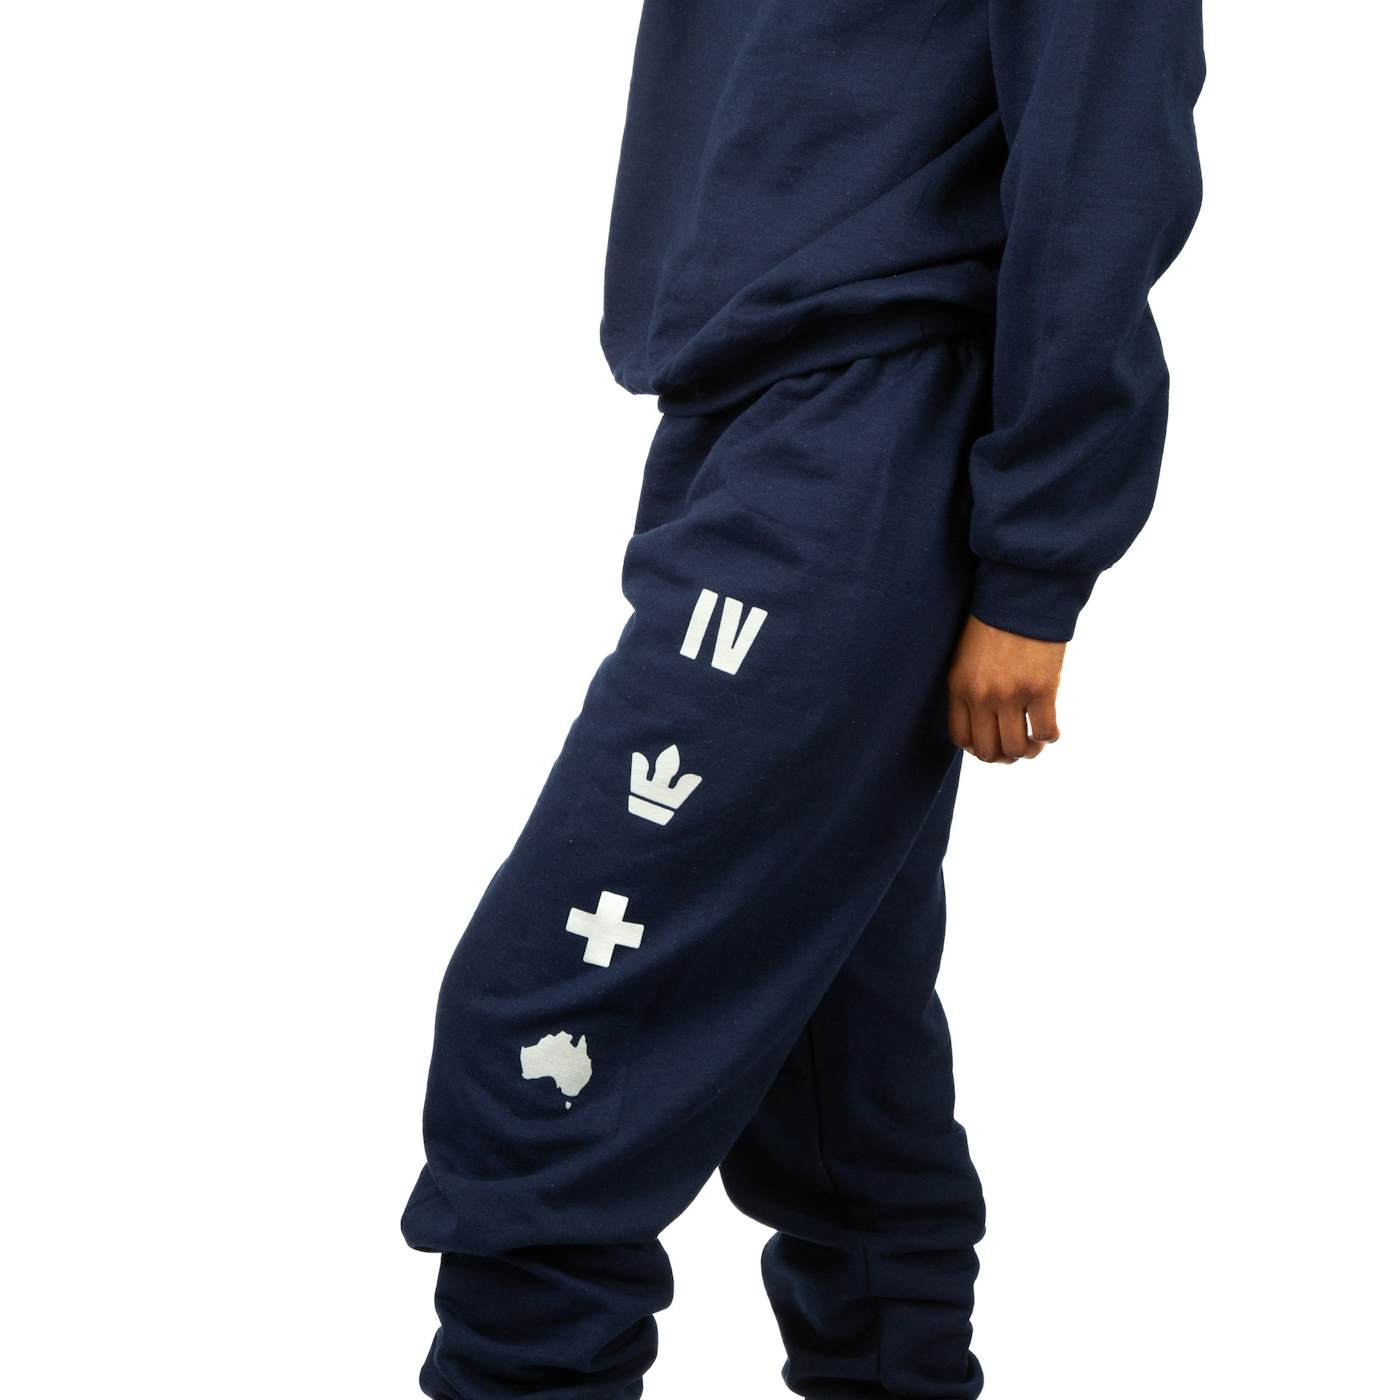 for KING & COUNTRY Symbol Sweatpants